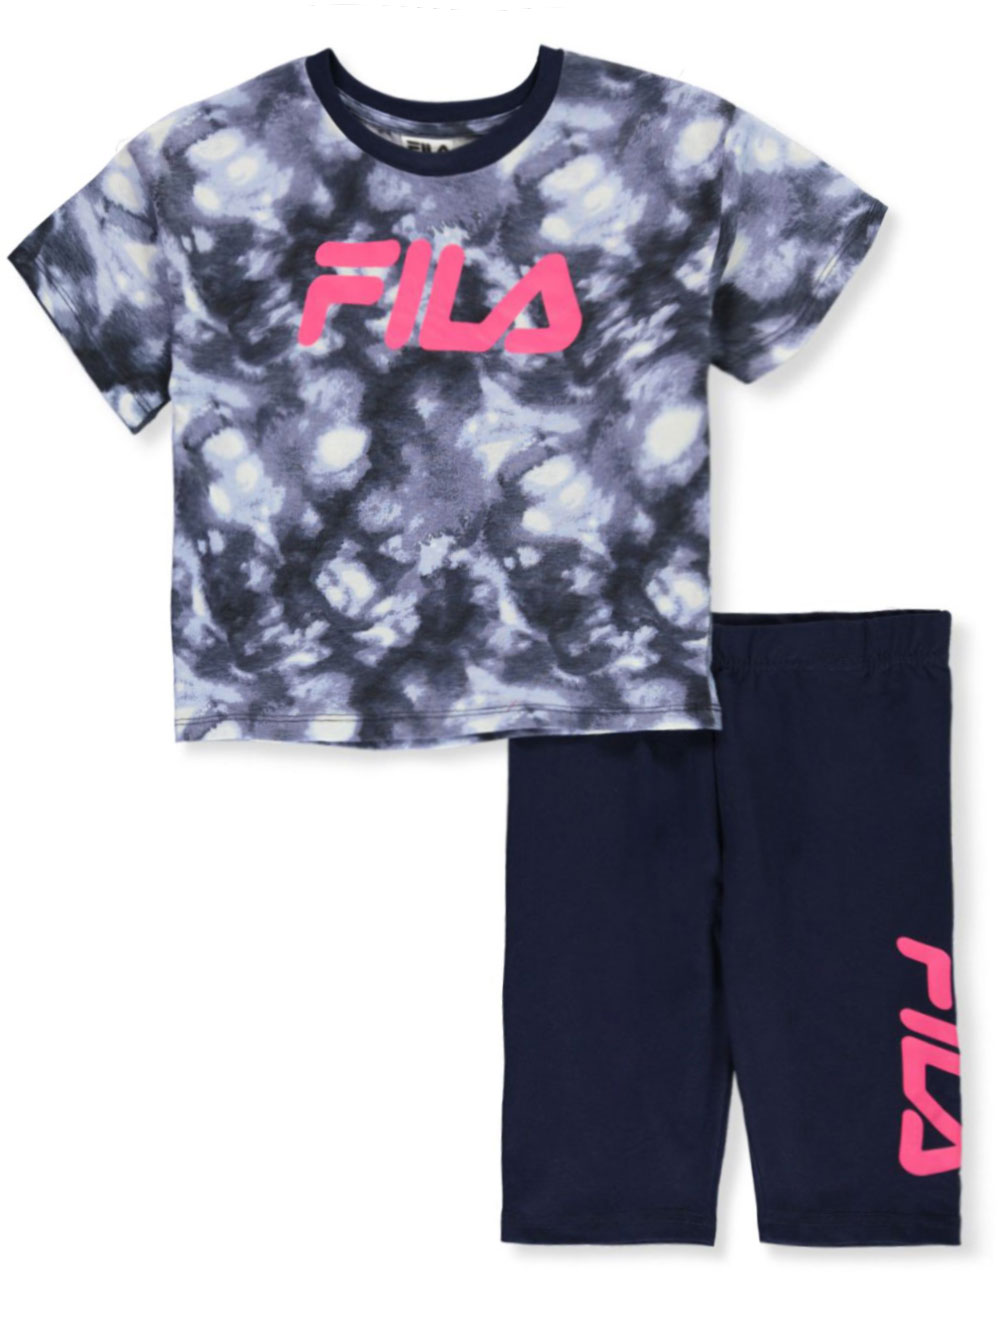 fila shorts outfit